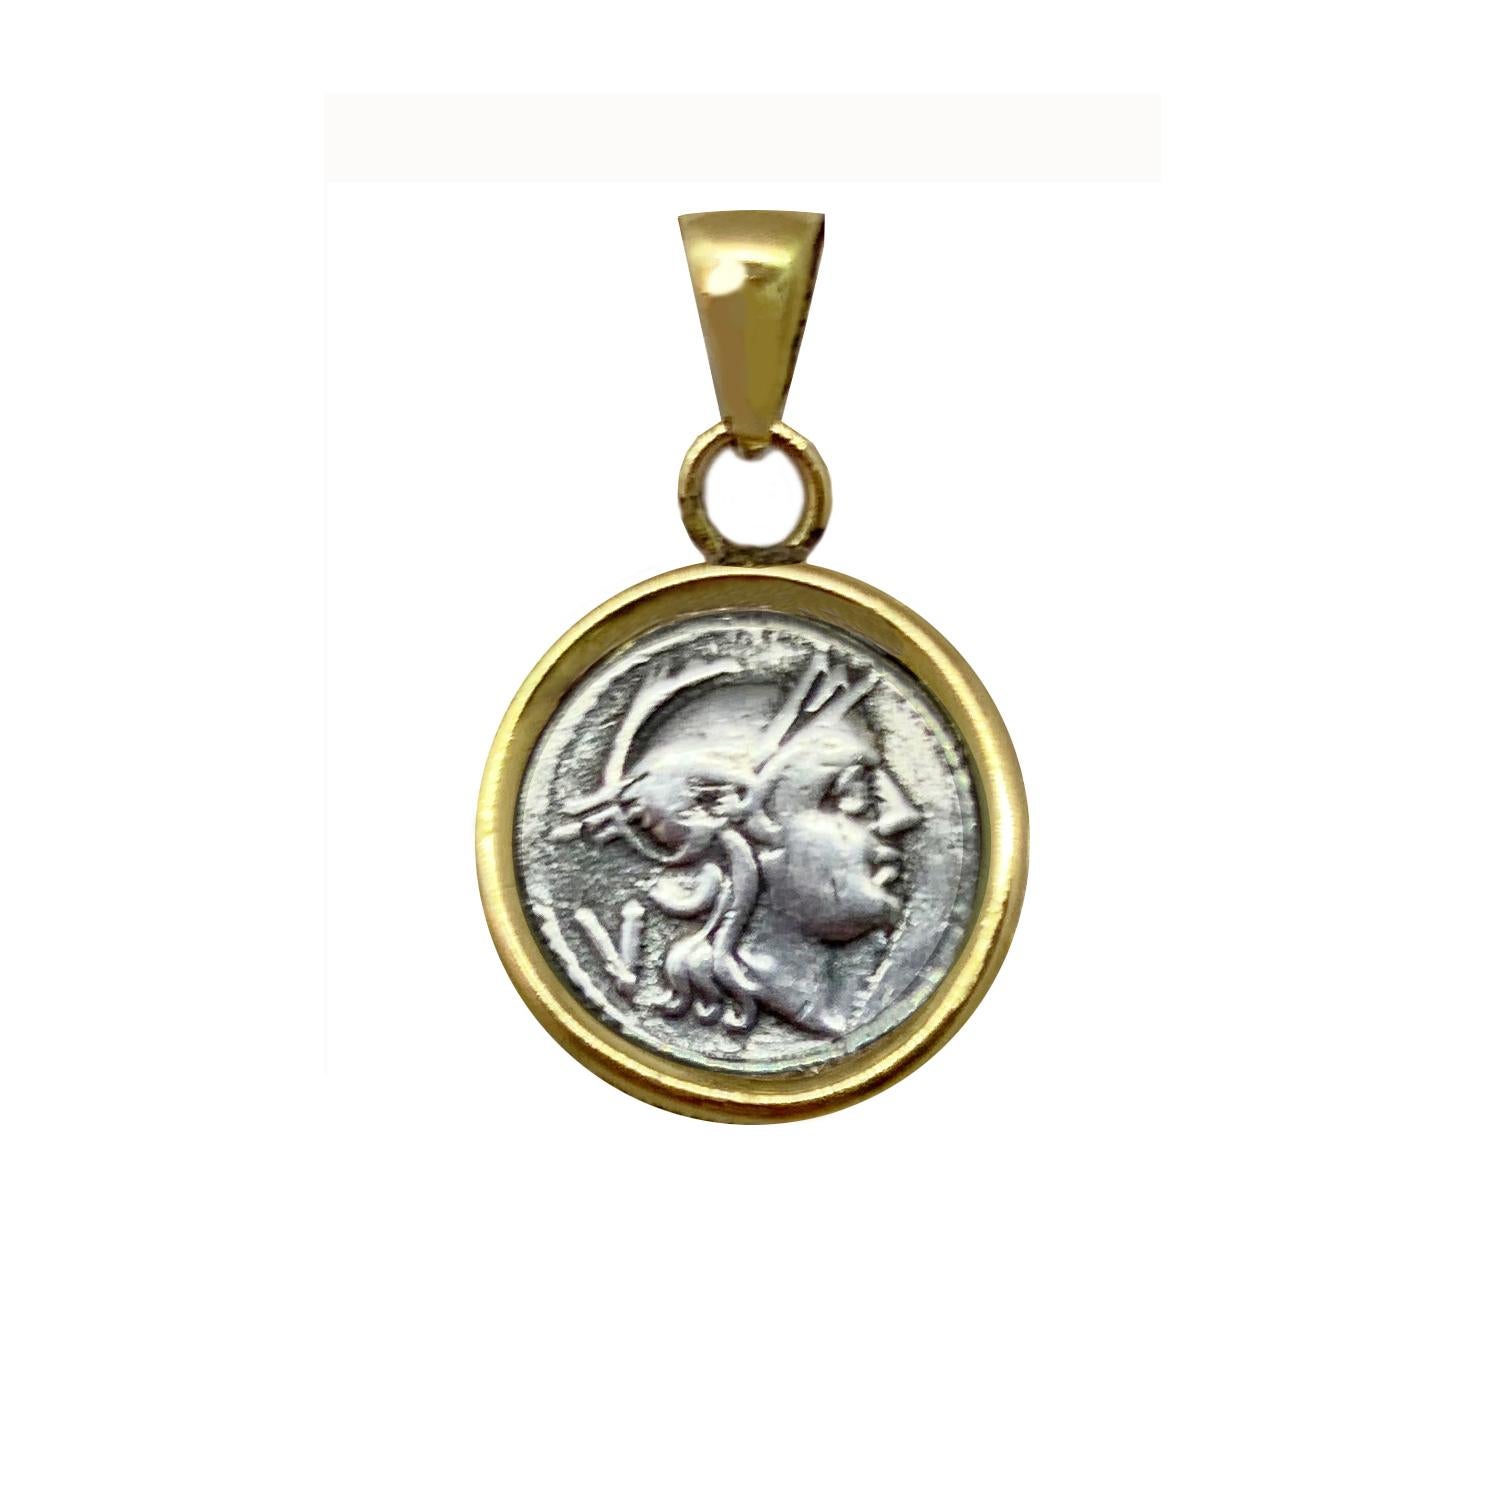 In the center of this 18 Kr Gold pendant , there is  an authentic Roman coin (silver denarius- 3dt century B.C. ) depicting the head of the Goddess Rome .In the reverse side of the coin we can see the Dioscury riding.

In ancient Roman religion,